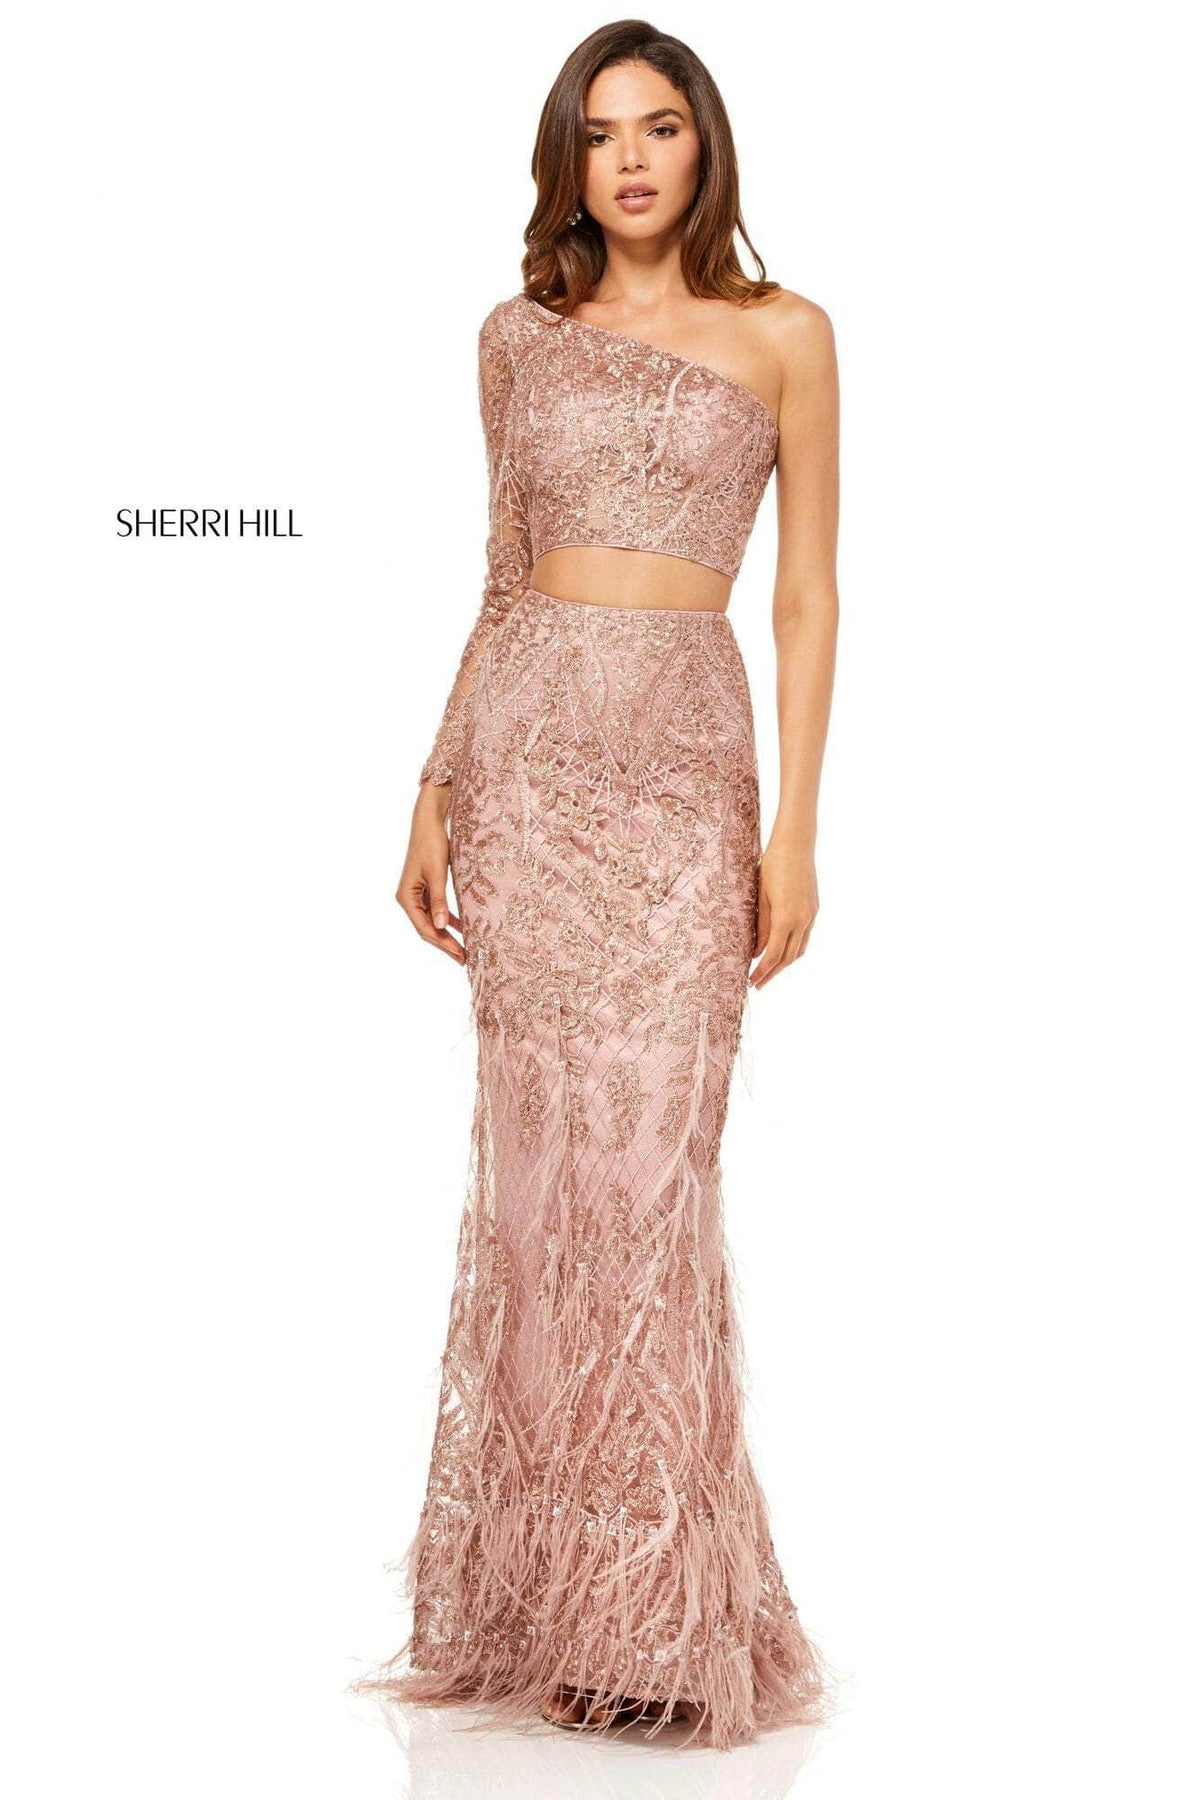 Sherri Hill 52555 - Feathered Mermaid Evening Dress Special Occasion Dress 4 